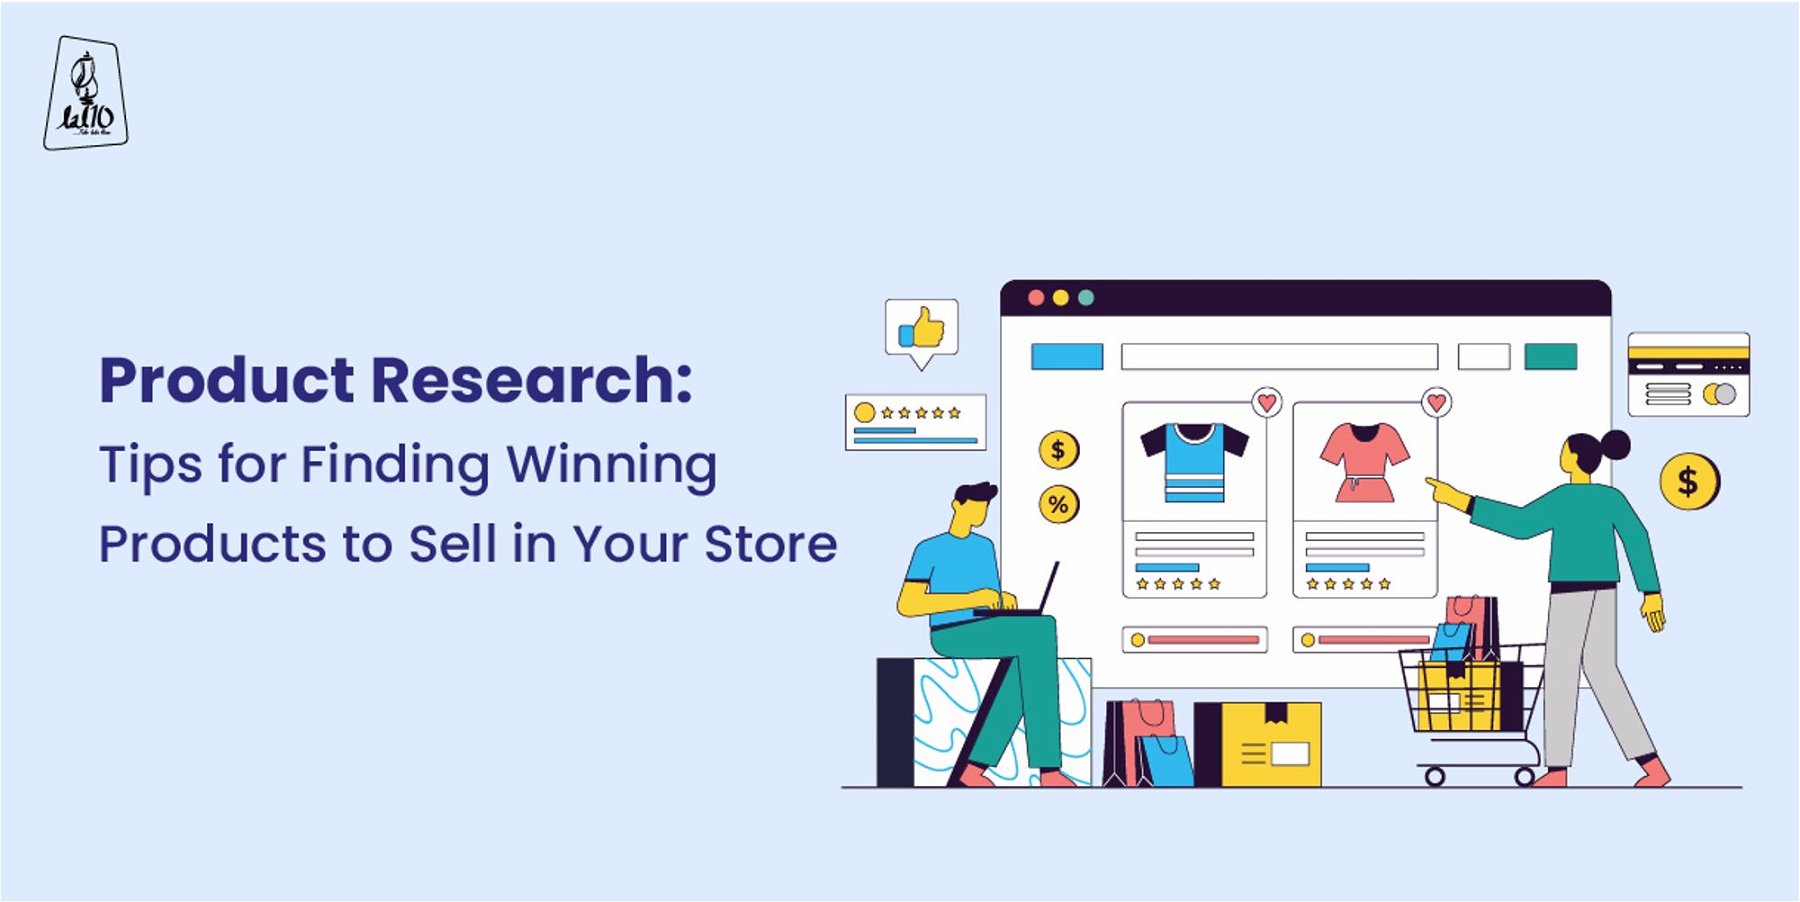 Product Research: Tips for Finding Winning Products to Sell in Your Store